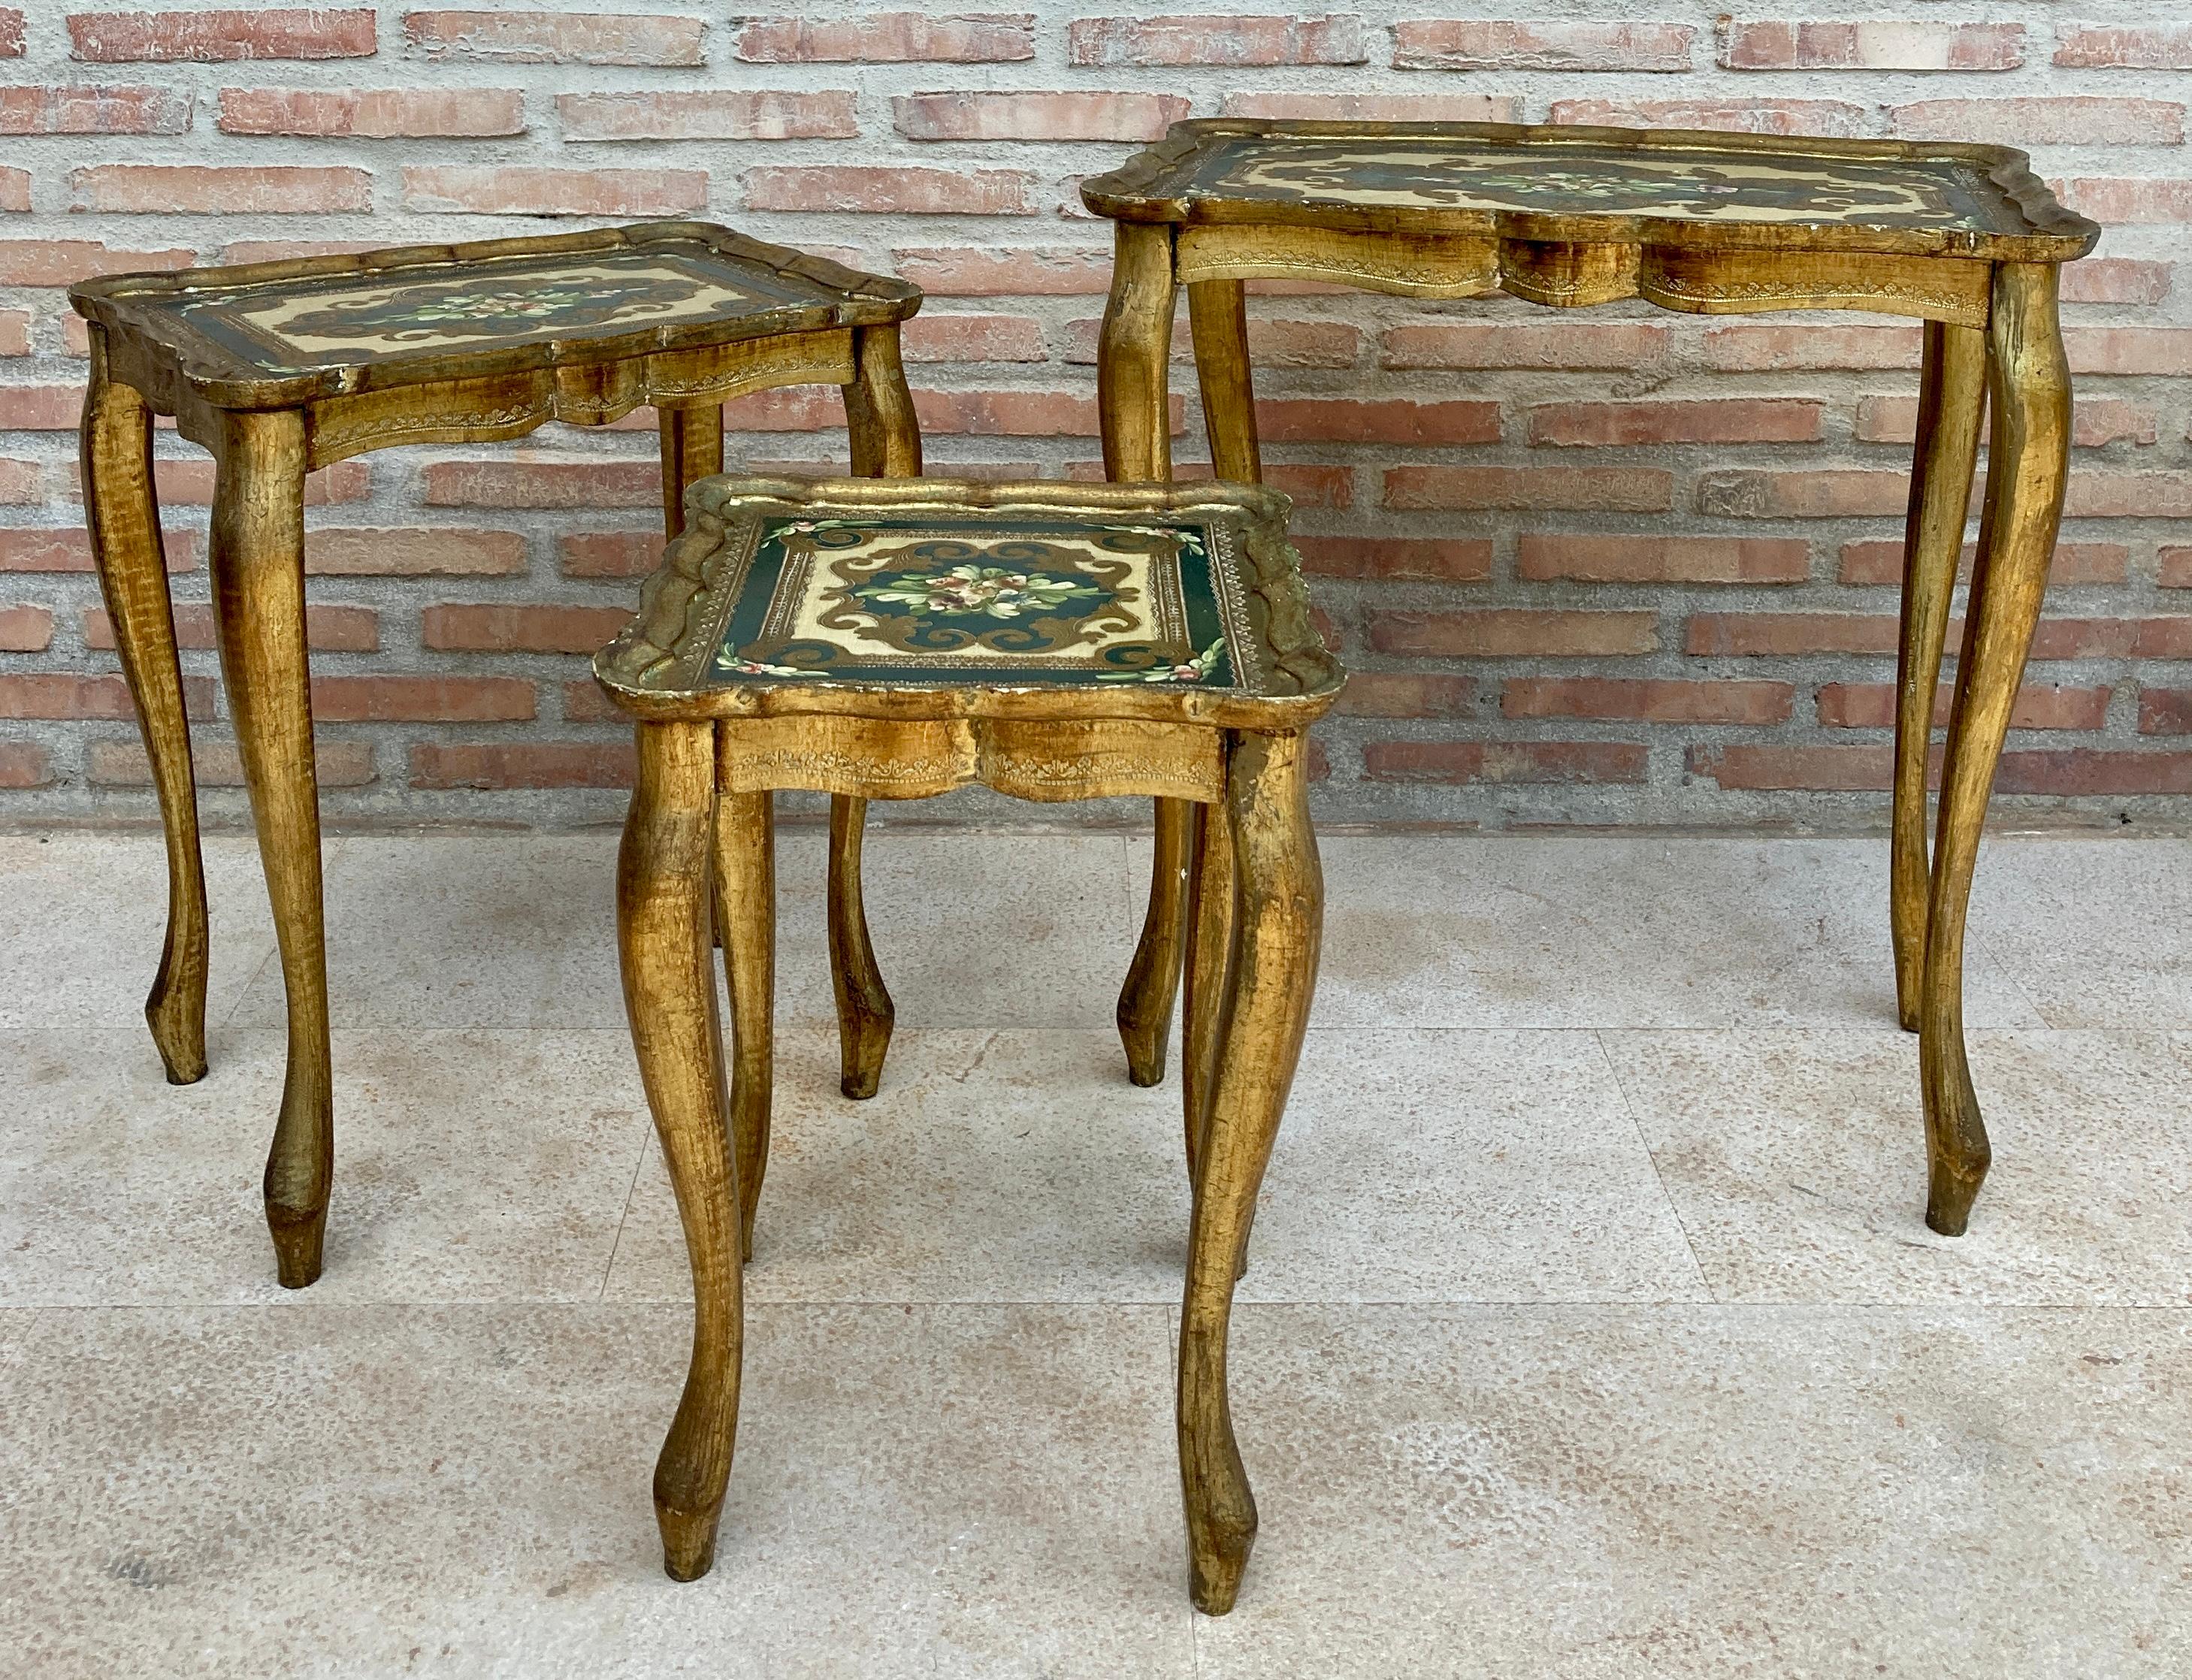 Vintage Italian Florentine neoclassical midcentury patinated nesting tables- set of three 1960s 
Lovely graphics ornate figural design scalloped trim. 
Original preowned unrestored condition and presentation. 
This stylish nest of 3 giltwood side